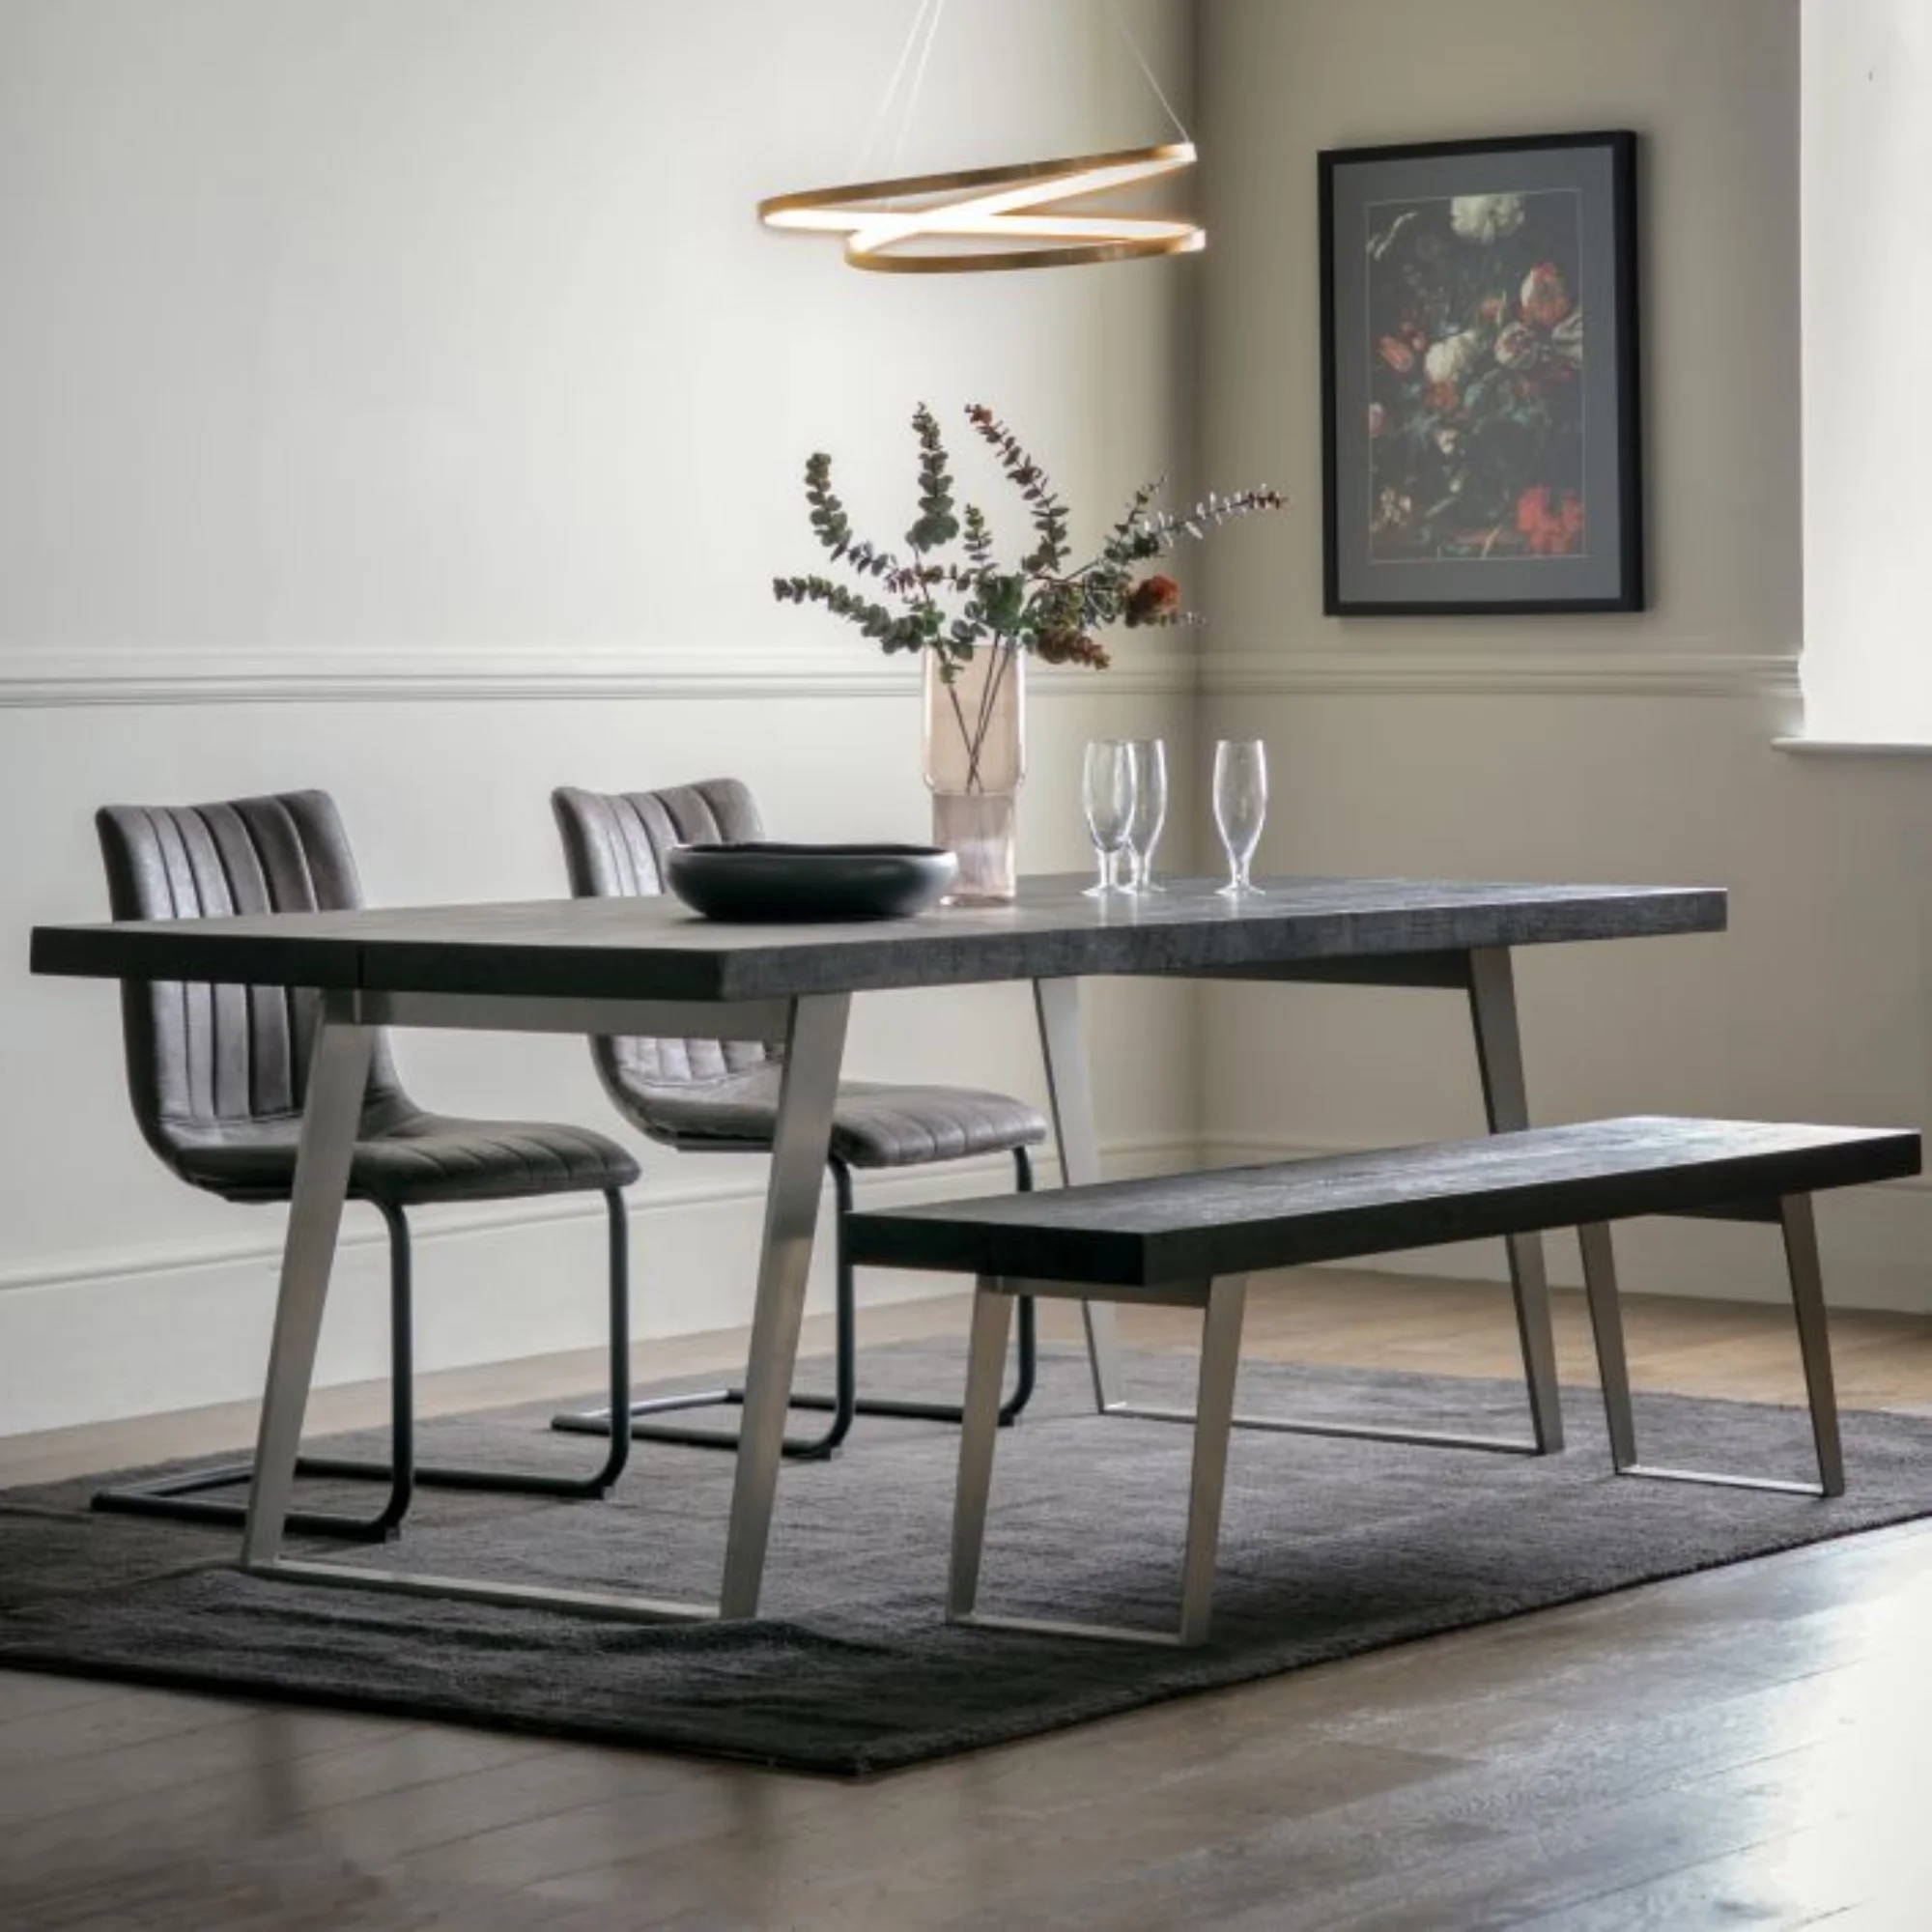 Pimlico Large Dining Table in Black Stained Acacia with Silver Angular Legs | MalletandPlane.com